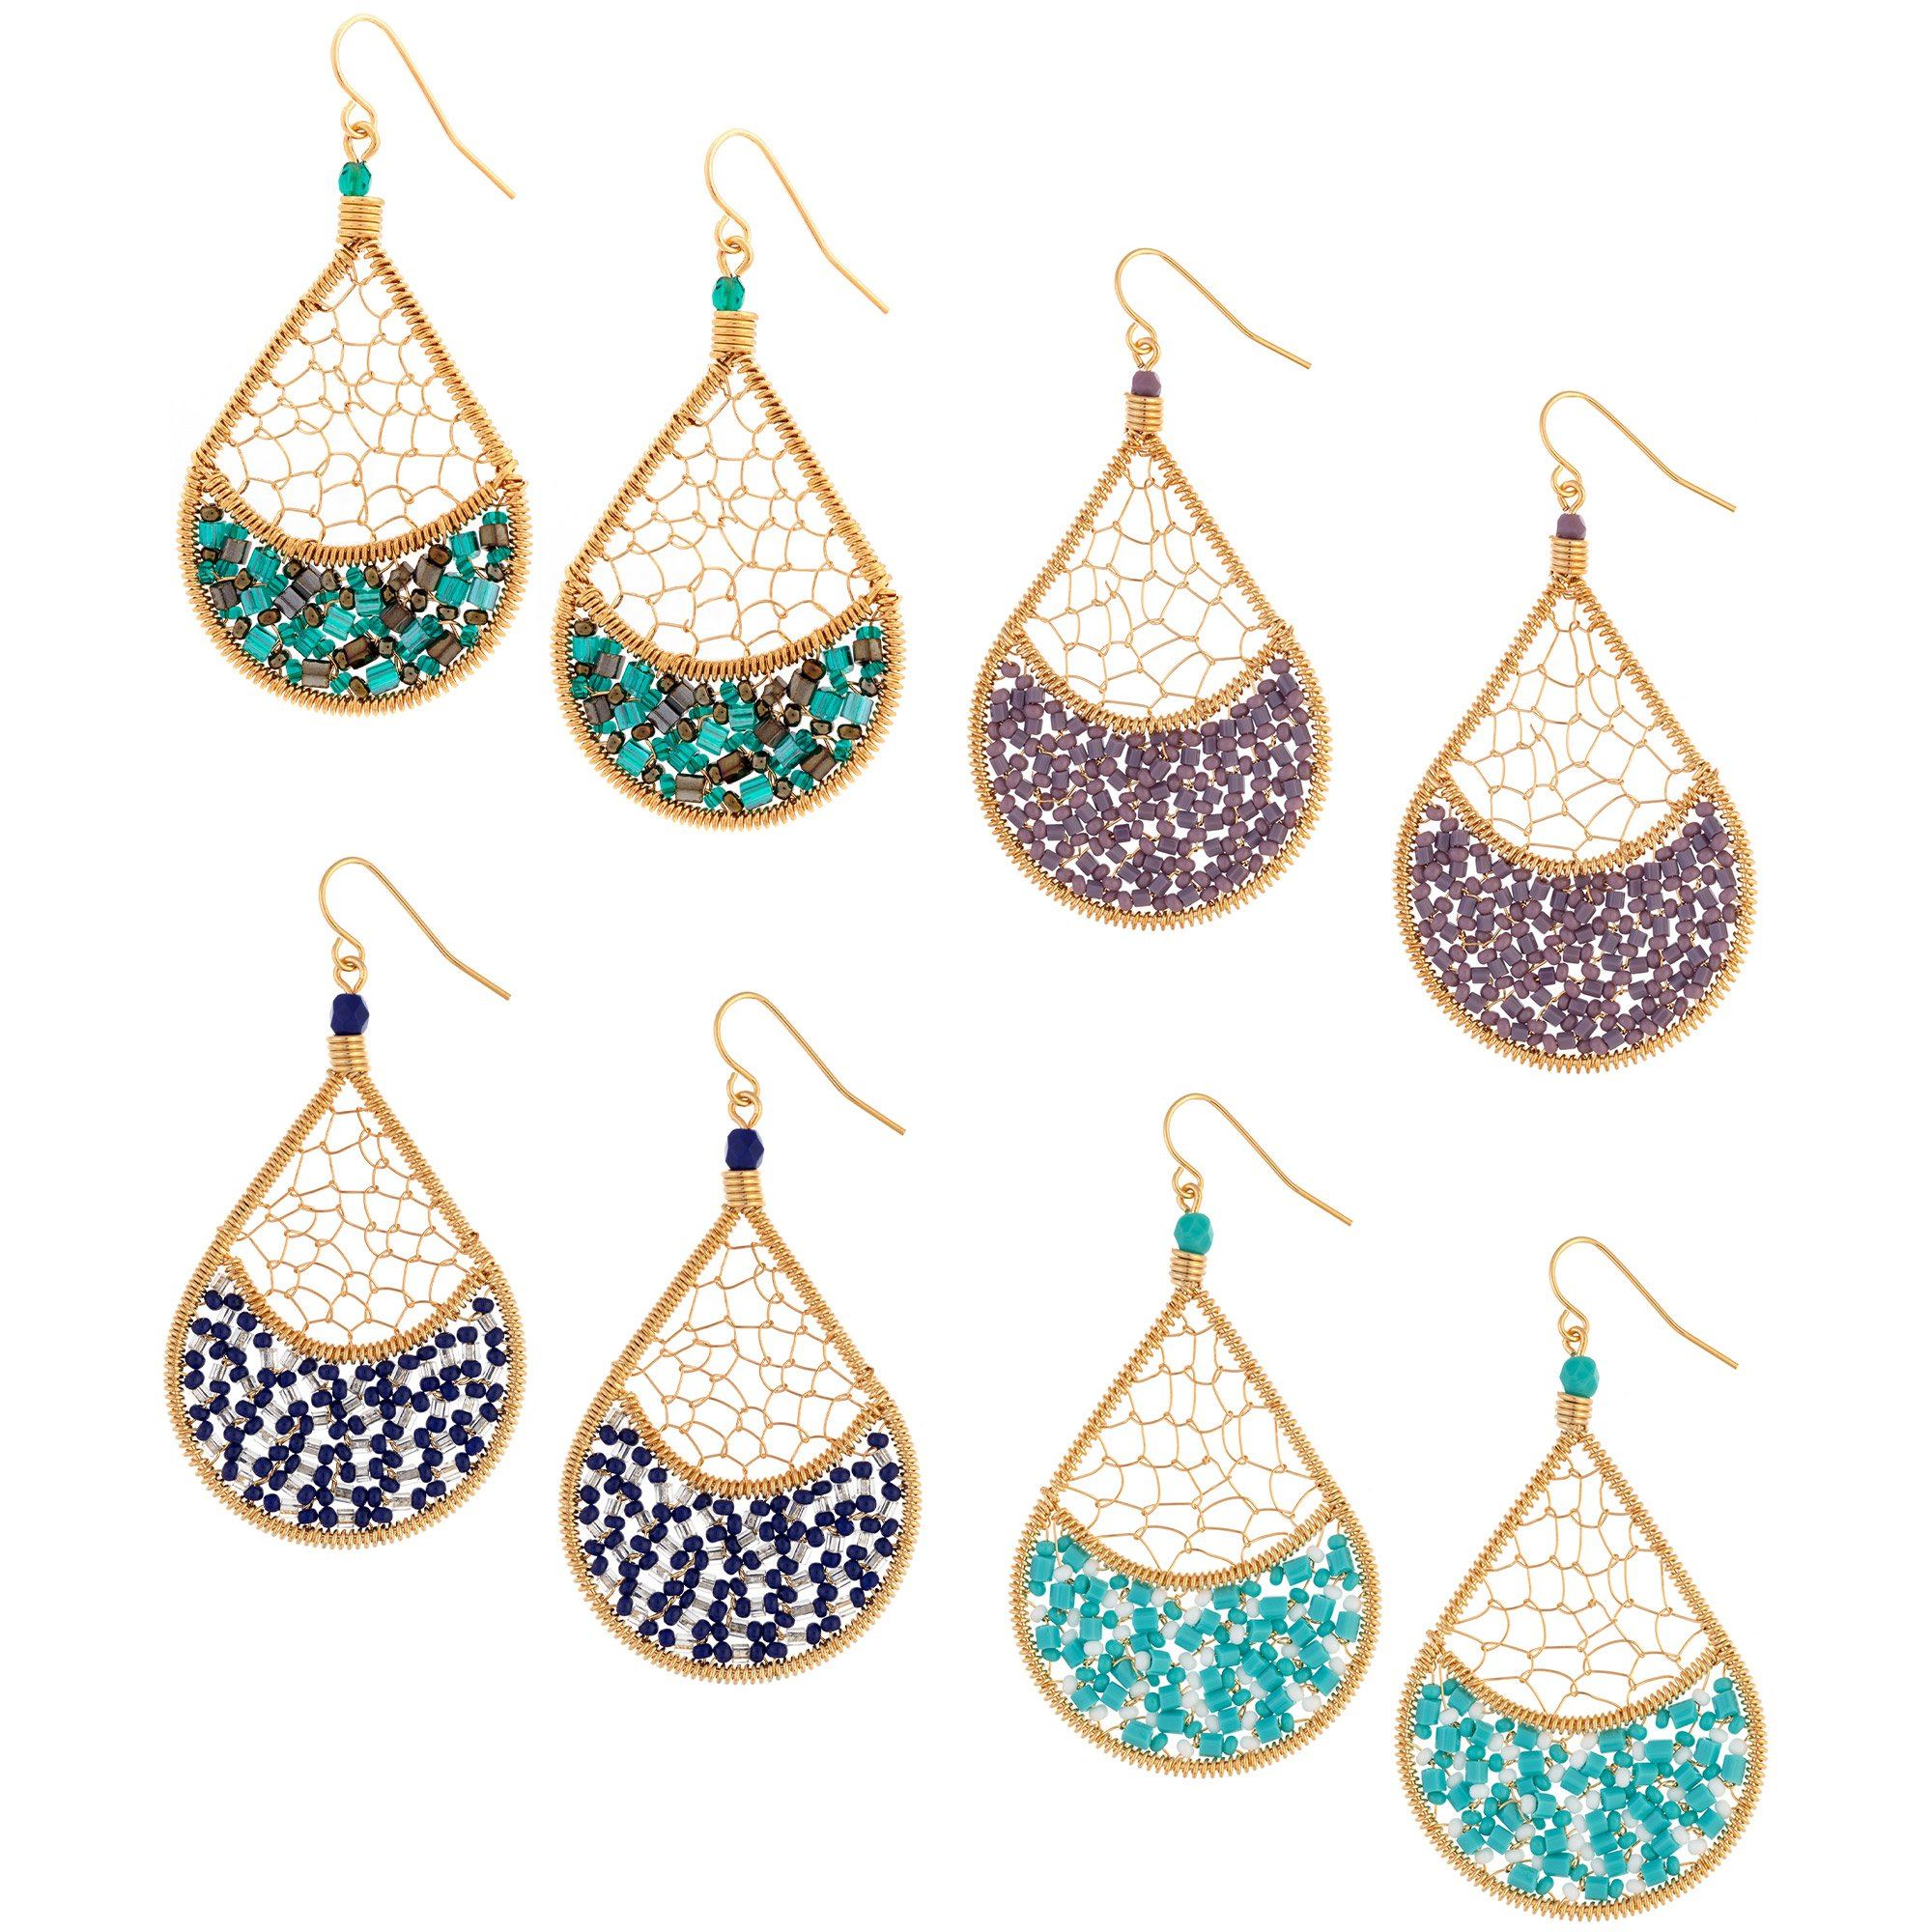 Threads & Beads Gold-Plated Earrings - Blue